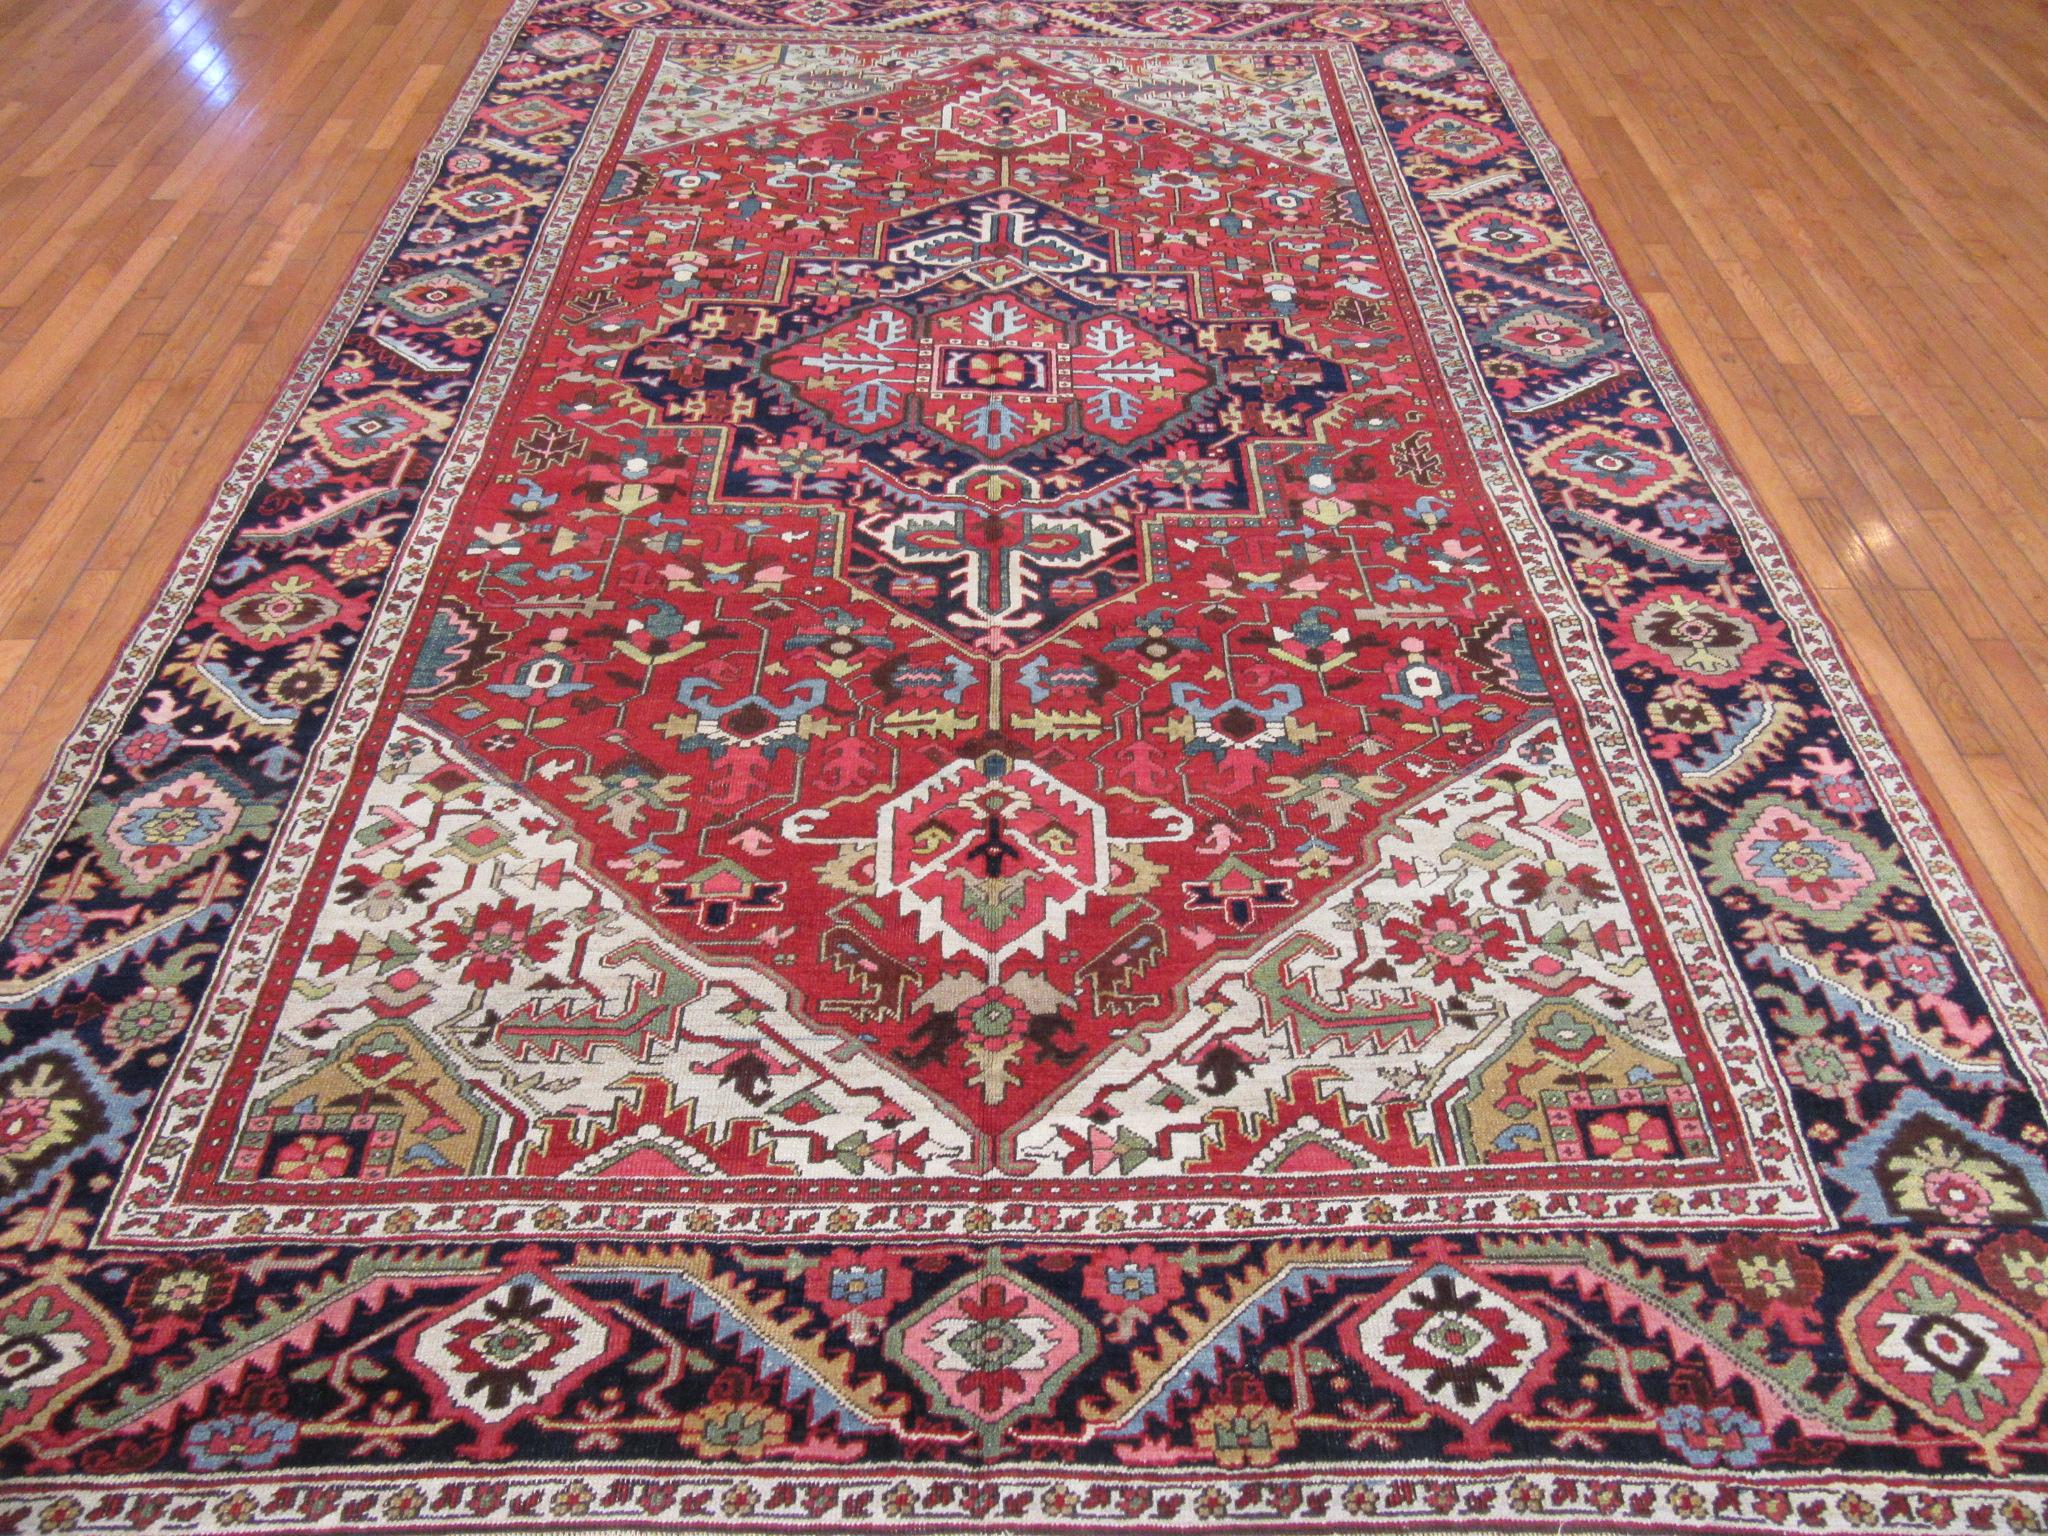 This is an antique hand knotted rug from the Infamous village of Heriz in northwest of Iran (Persian).
This rug has the primary colors and geometric design made with wool and natural dyes. A very useful size for your home or office. It measure 7'